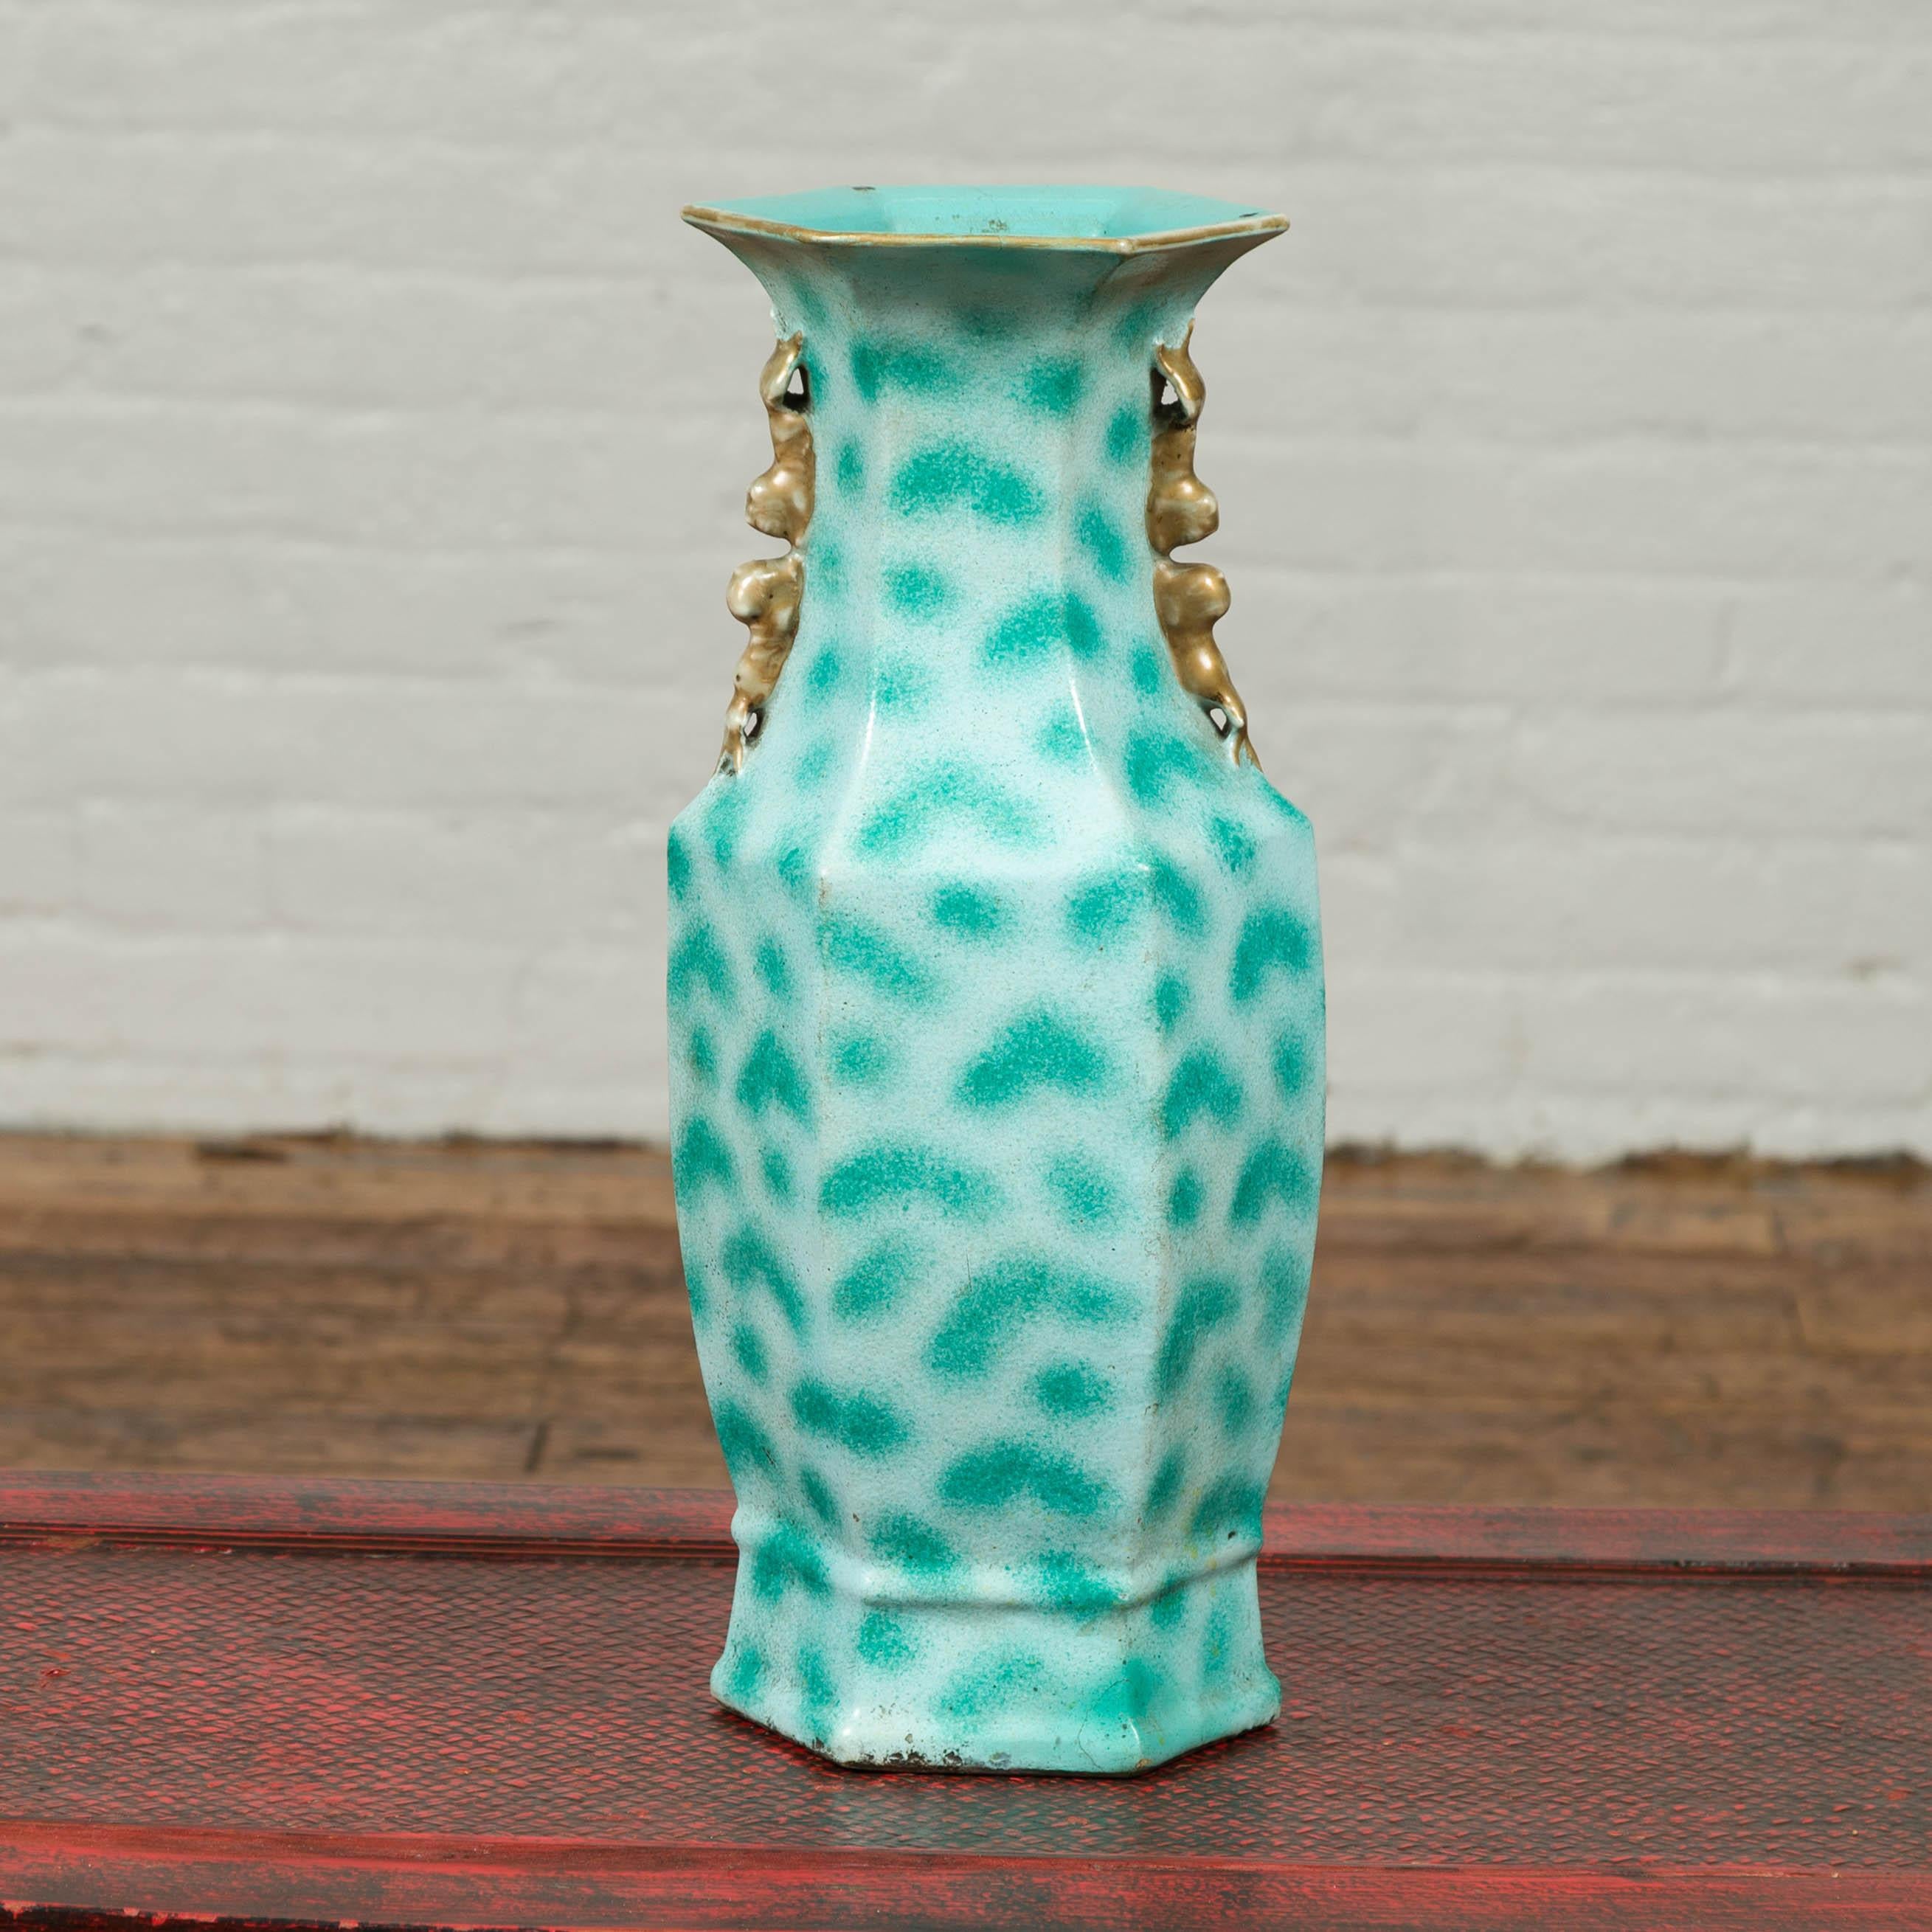 A vintage Chinese turquoise color vase from the mid-20th century, with spotted design and tiny handles. Born in China during the mid-20th century, this vase attracts our attention with its turquoise color and spotted motifs. Topped with a hexagonal